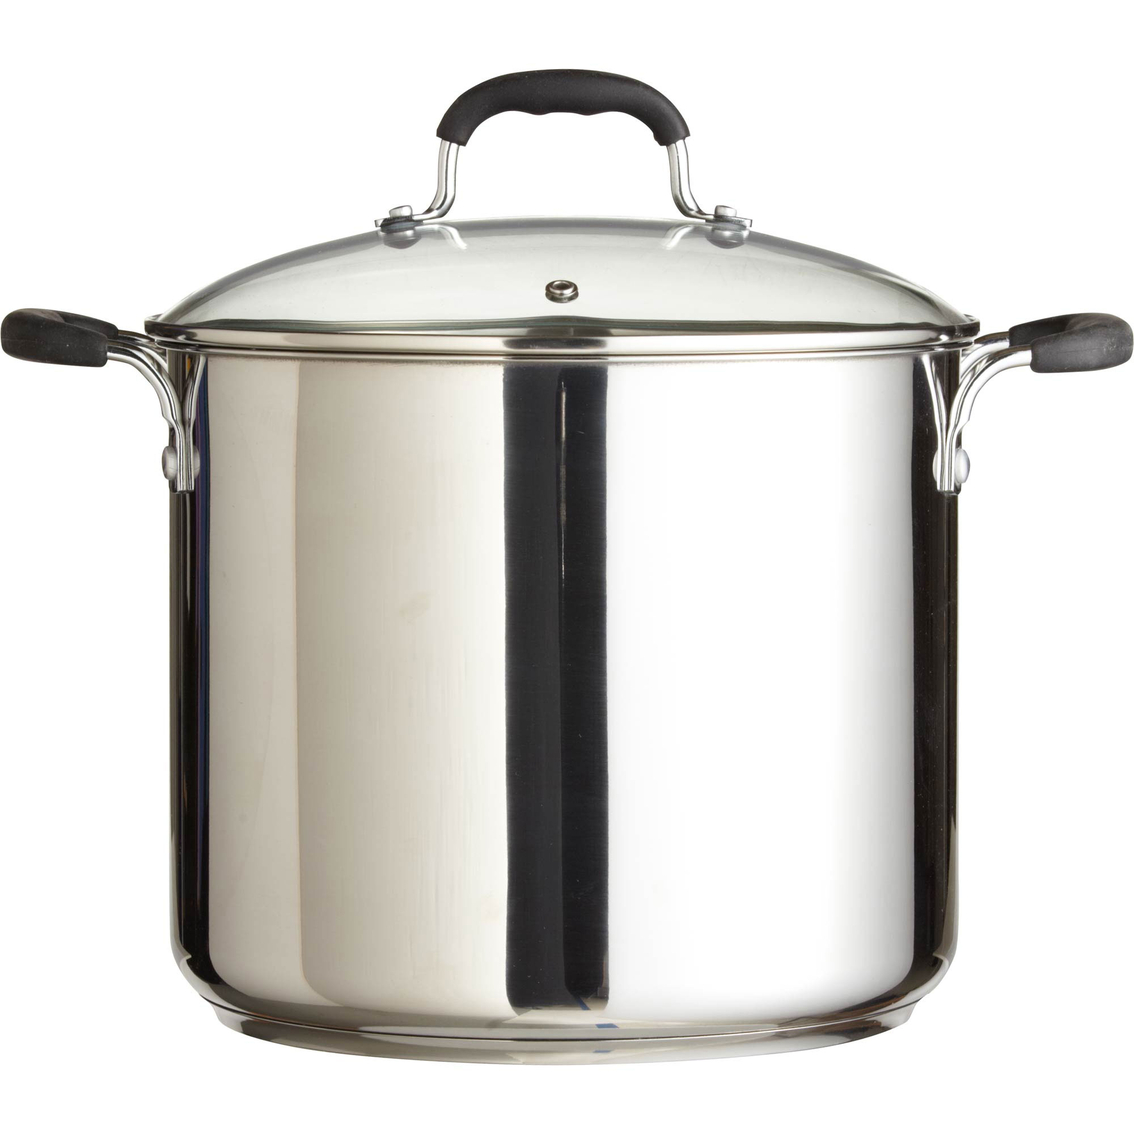 T-fal Stainless Steel 12 Qt. Stockpot | Stock Pots | Household | Shop T Fal 12 Qt Stock Pot Stainless Steel